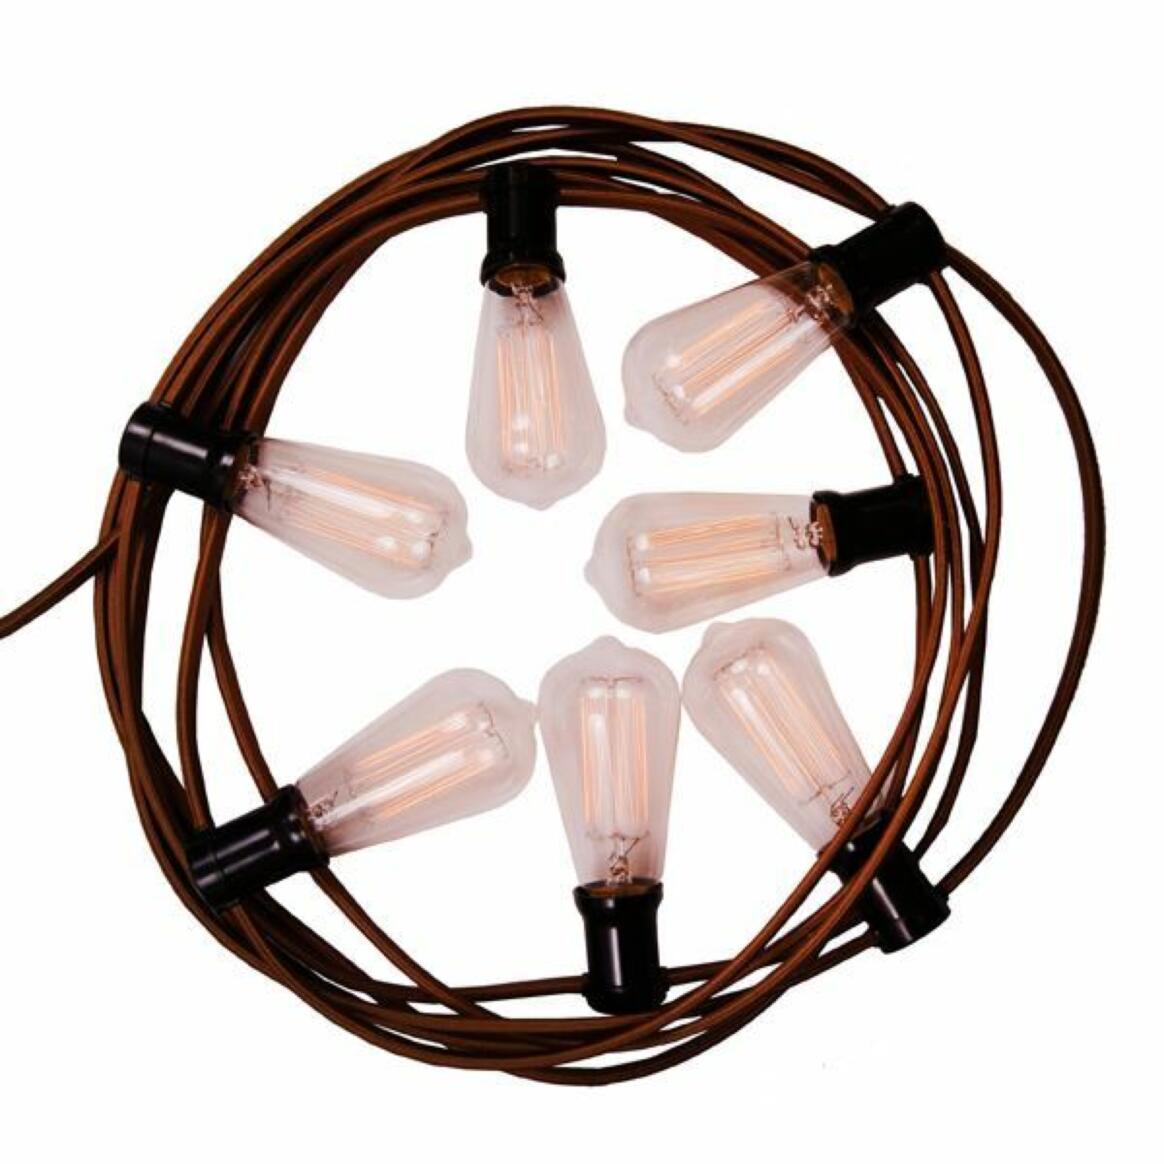 Braided Cable for Festoon or String Lights main product image